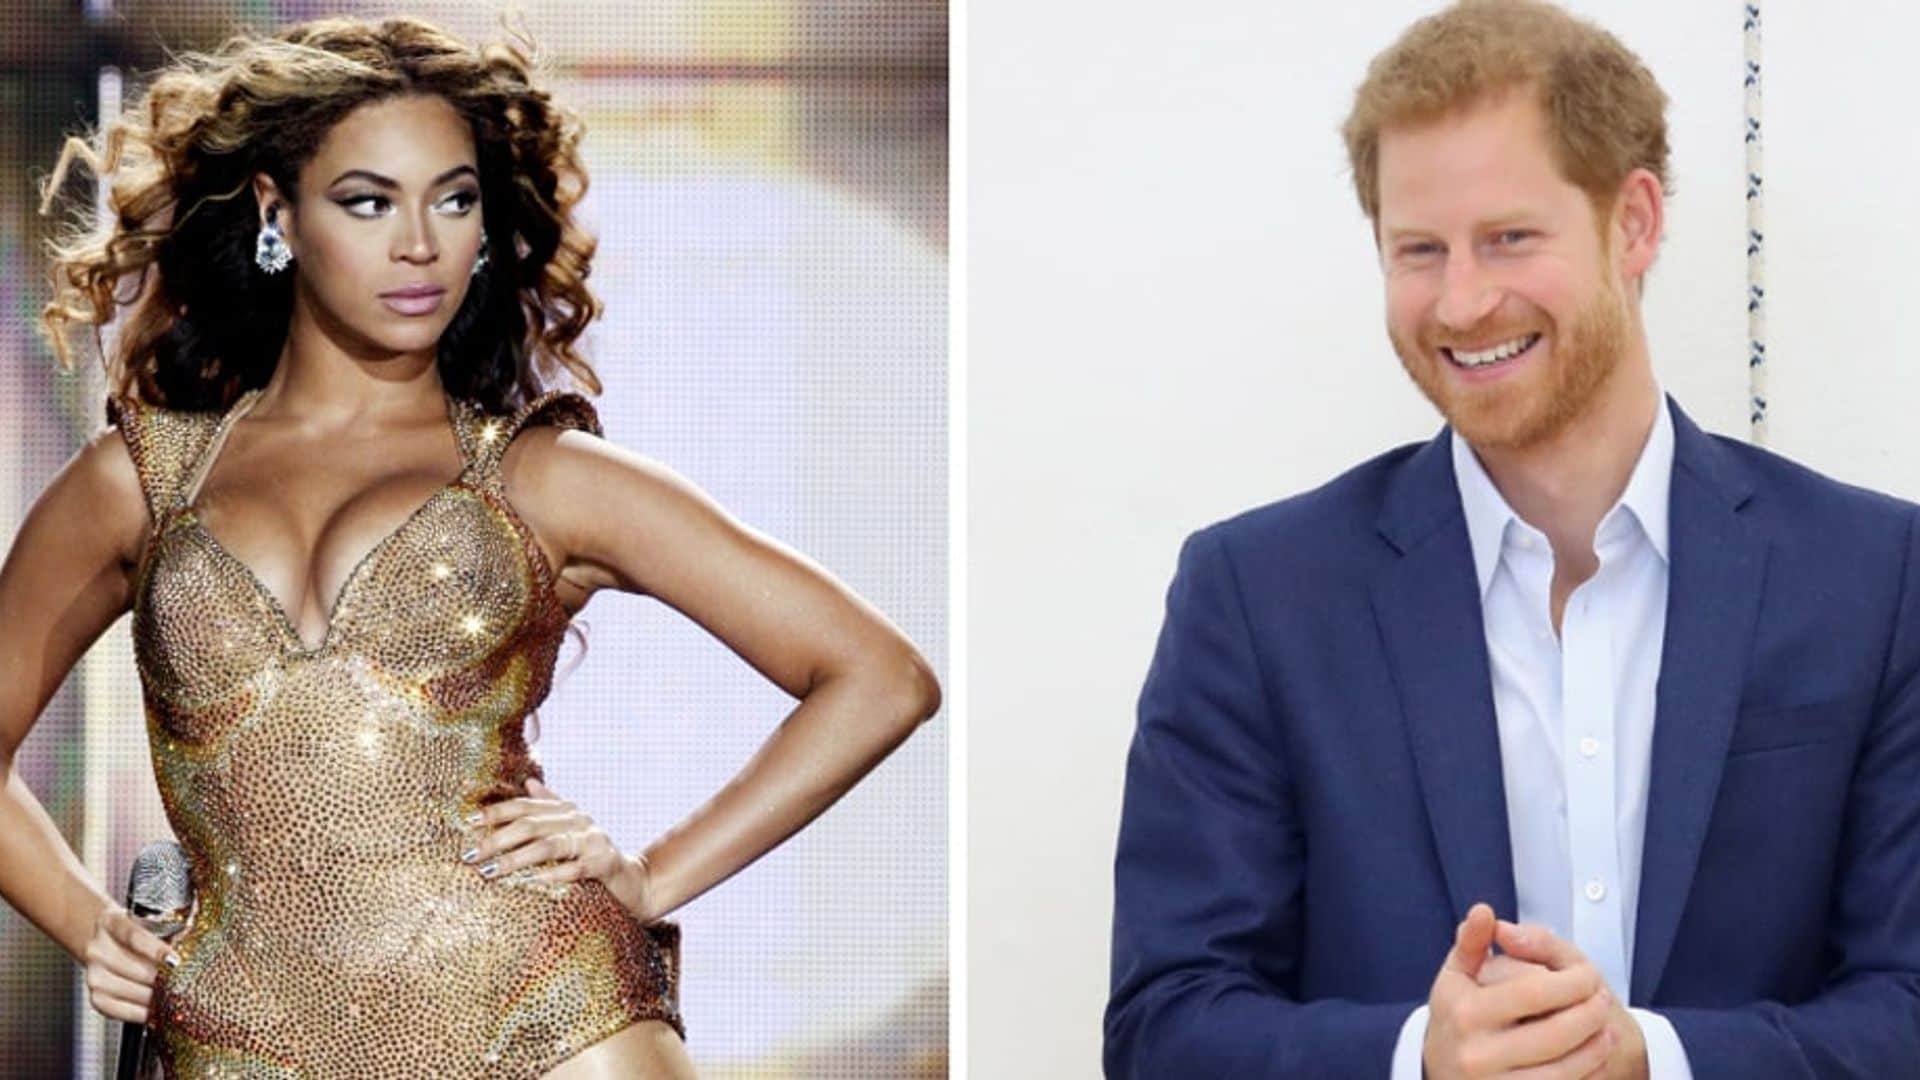 Prince Harry and Beyoncé might cross paths at this star-studded event in London